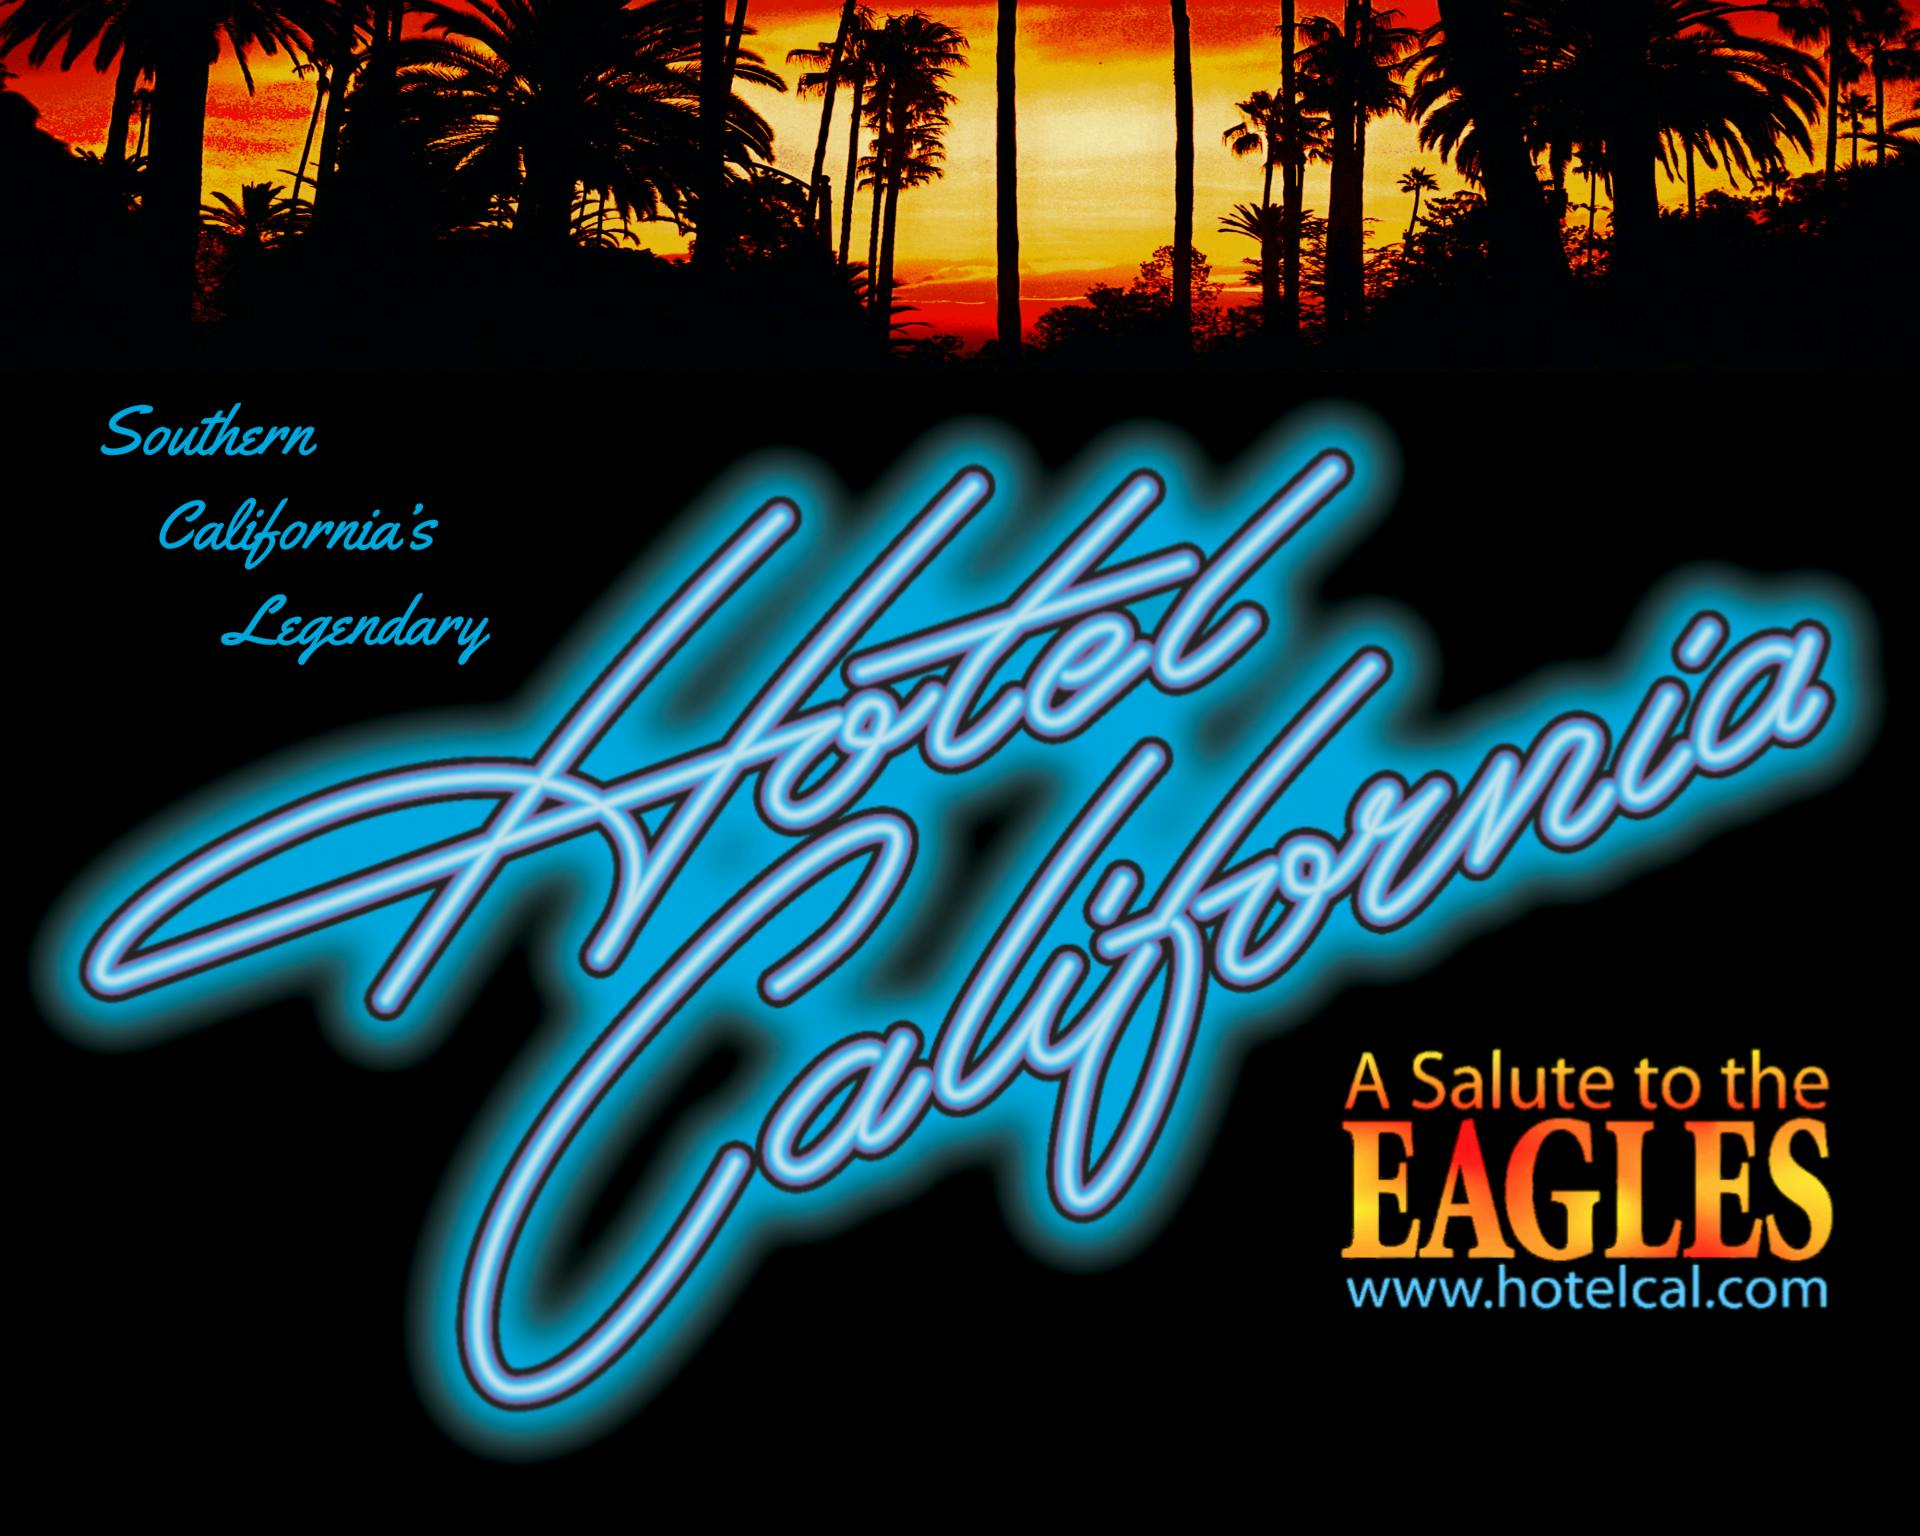 RIVERS CASINO PORTSMOUTH HOSTS LIVE PERFORMANCE OF HOTEL CALIFORNIA “A SALUTE TO THE EAGLES” ON SEPT. 13, 2024